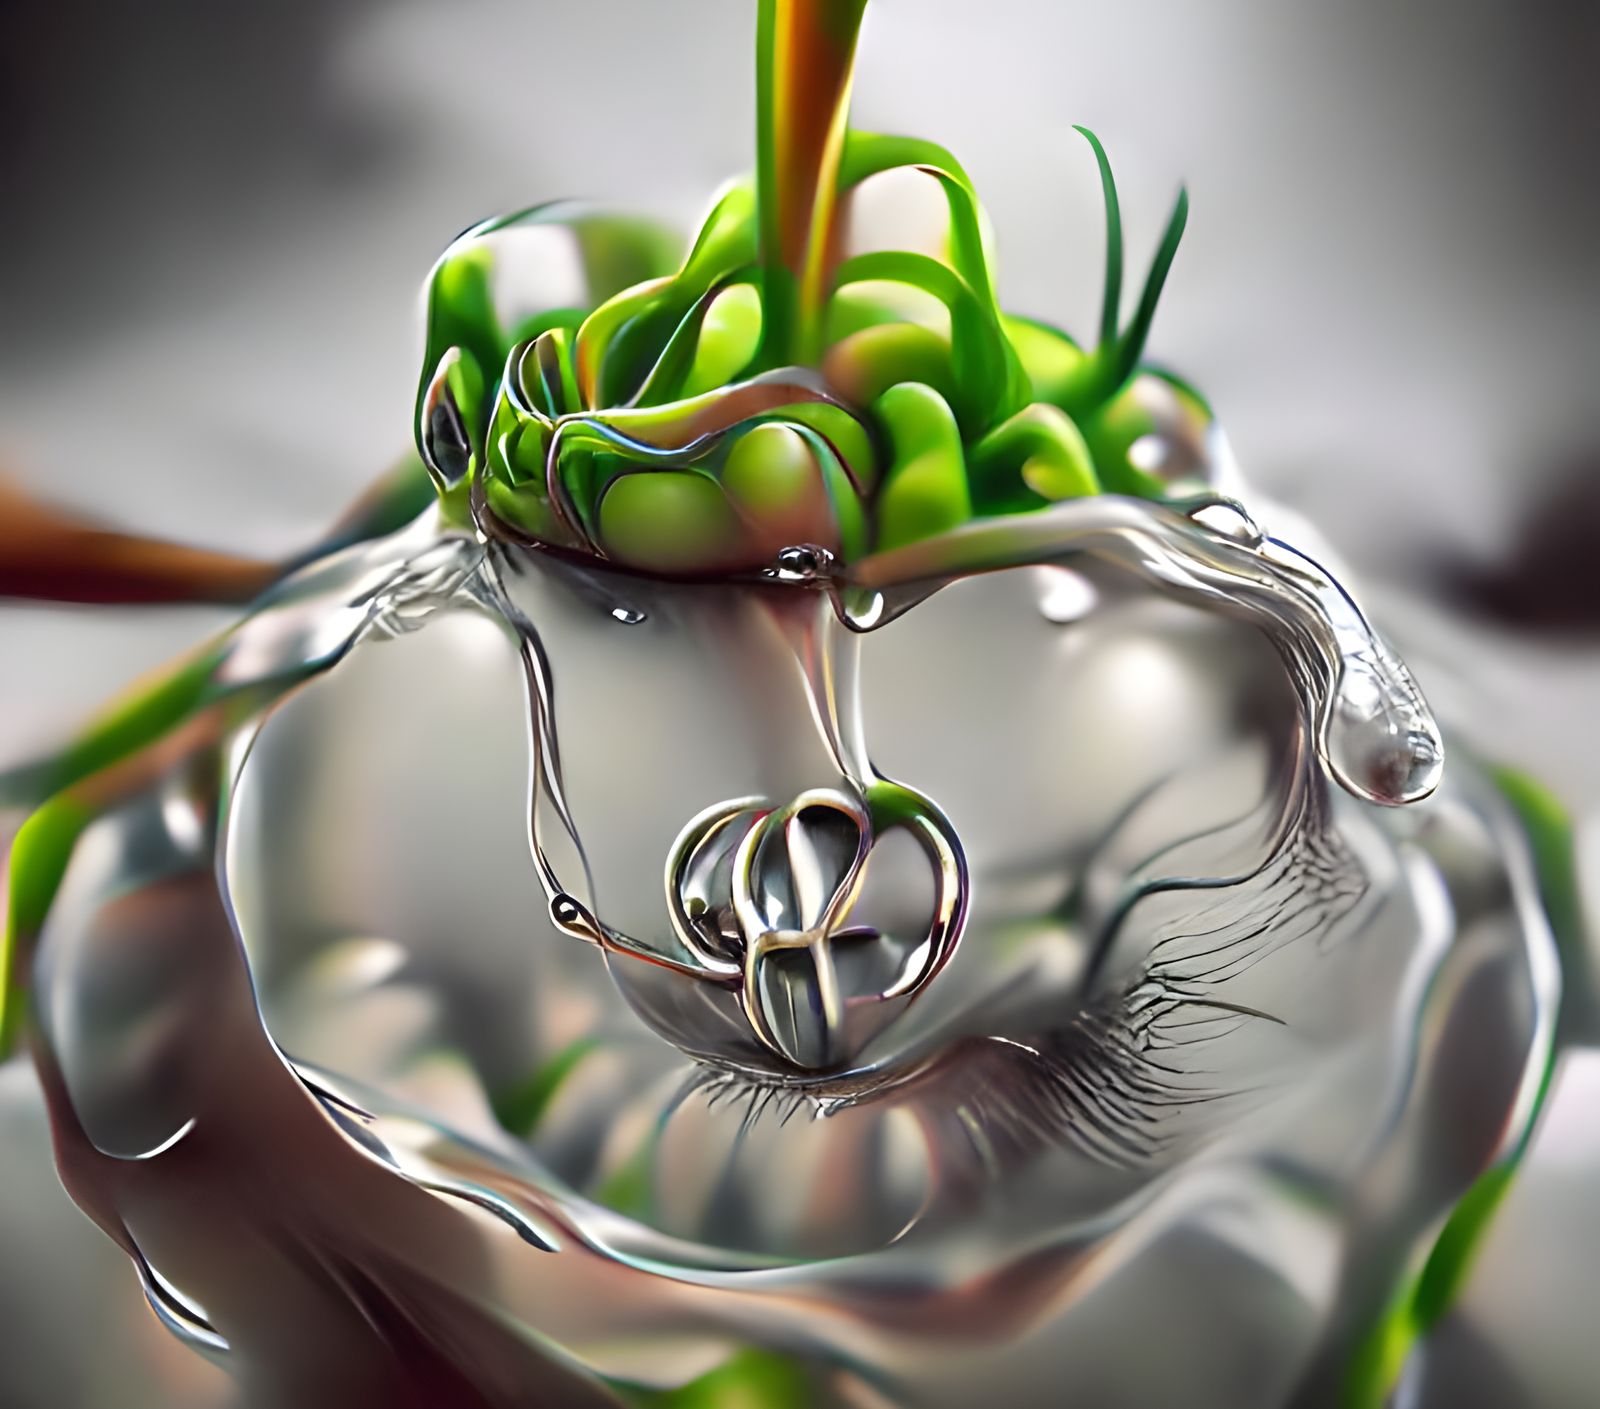 Tendril bush in a drop of water, beating heart